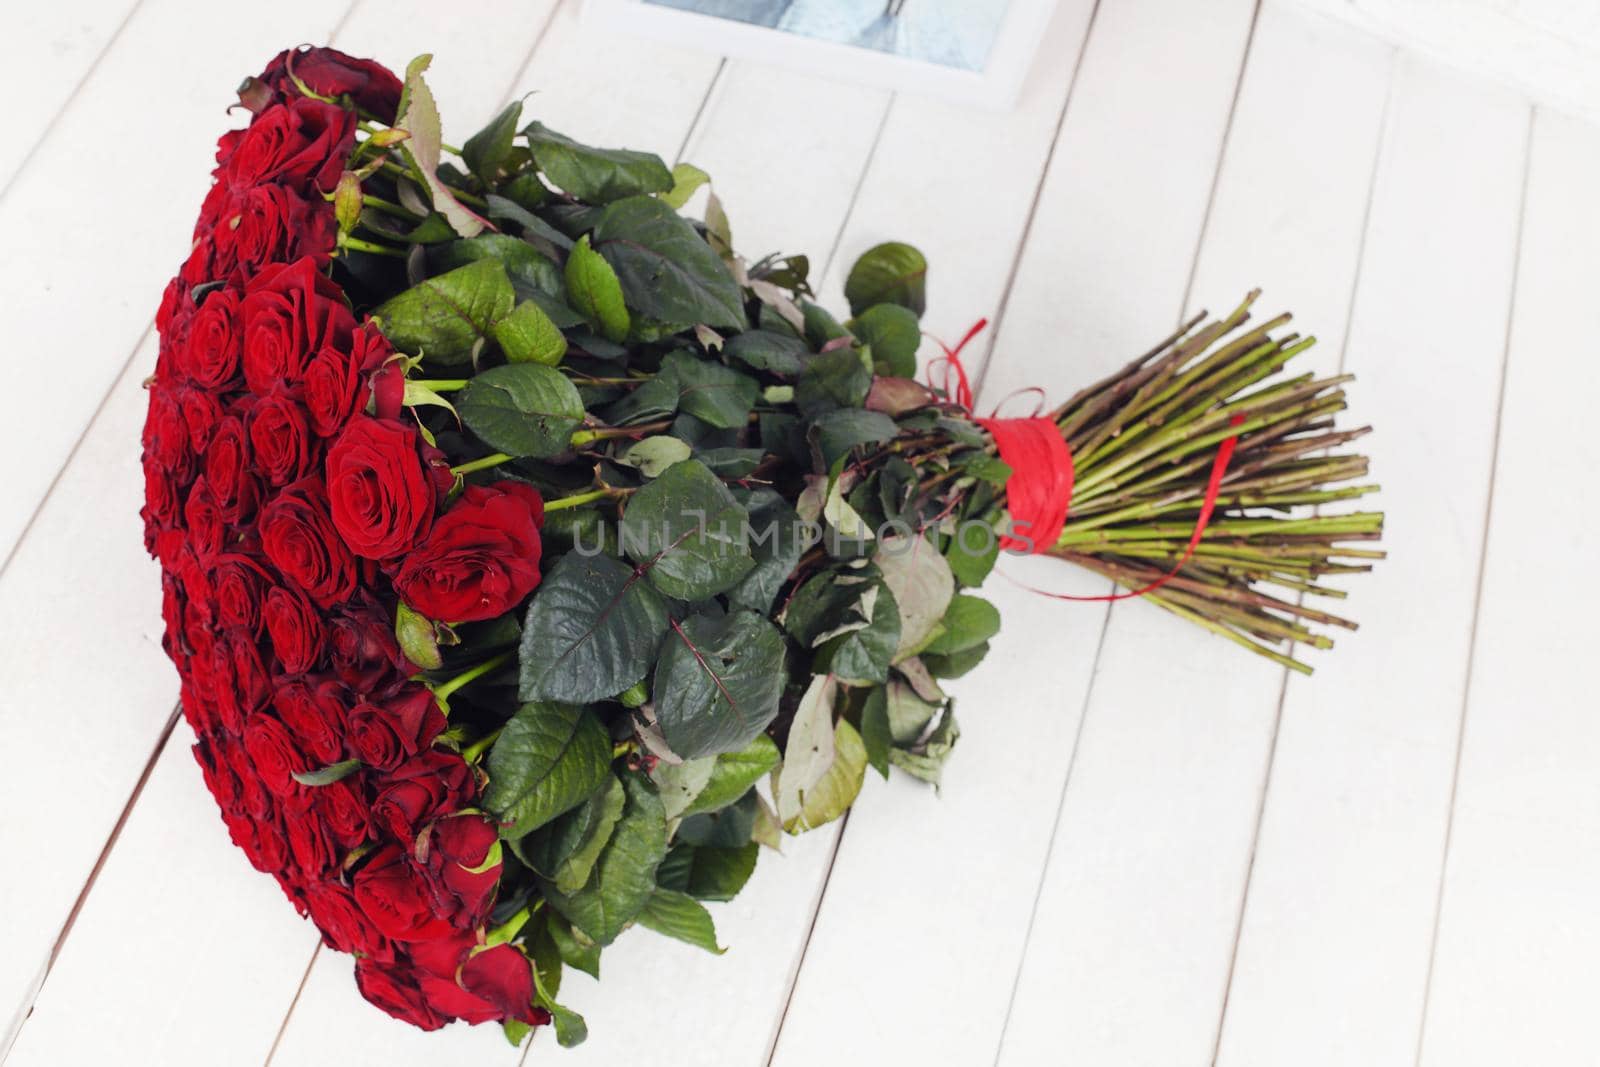 Big Red Roses Bouquet over white by IvanGalashchuk